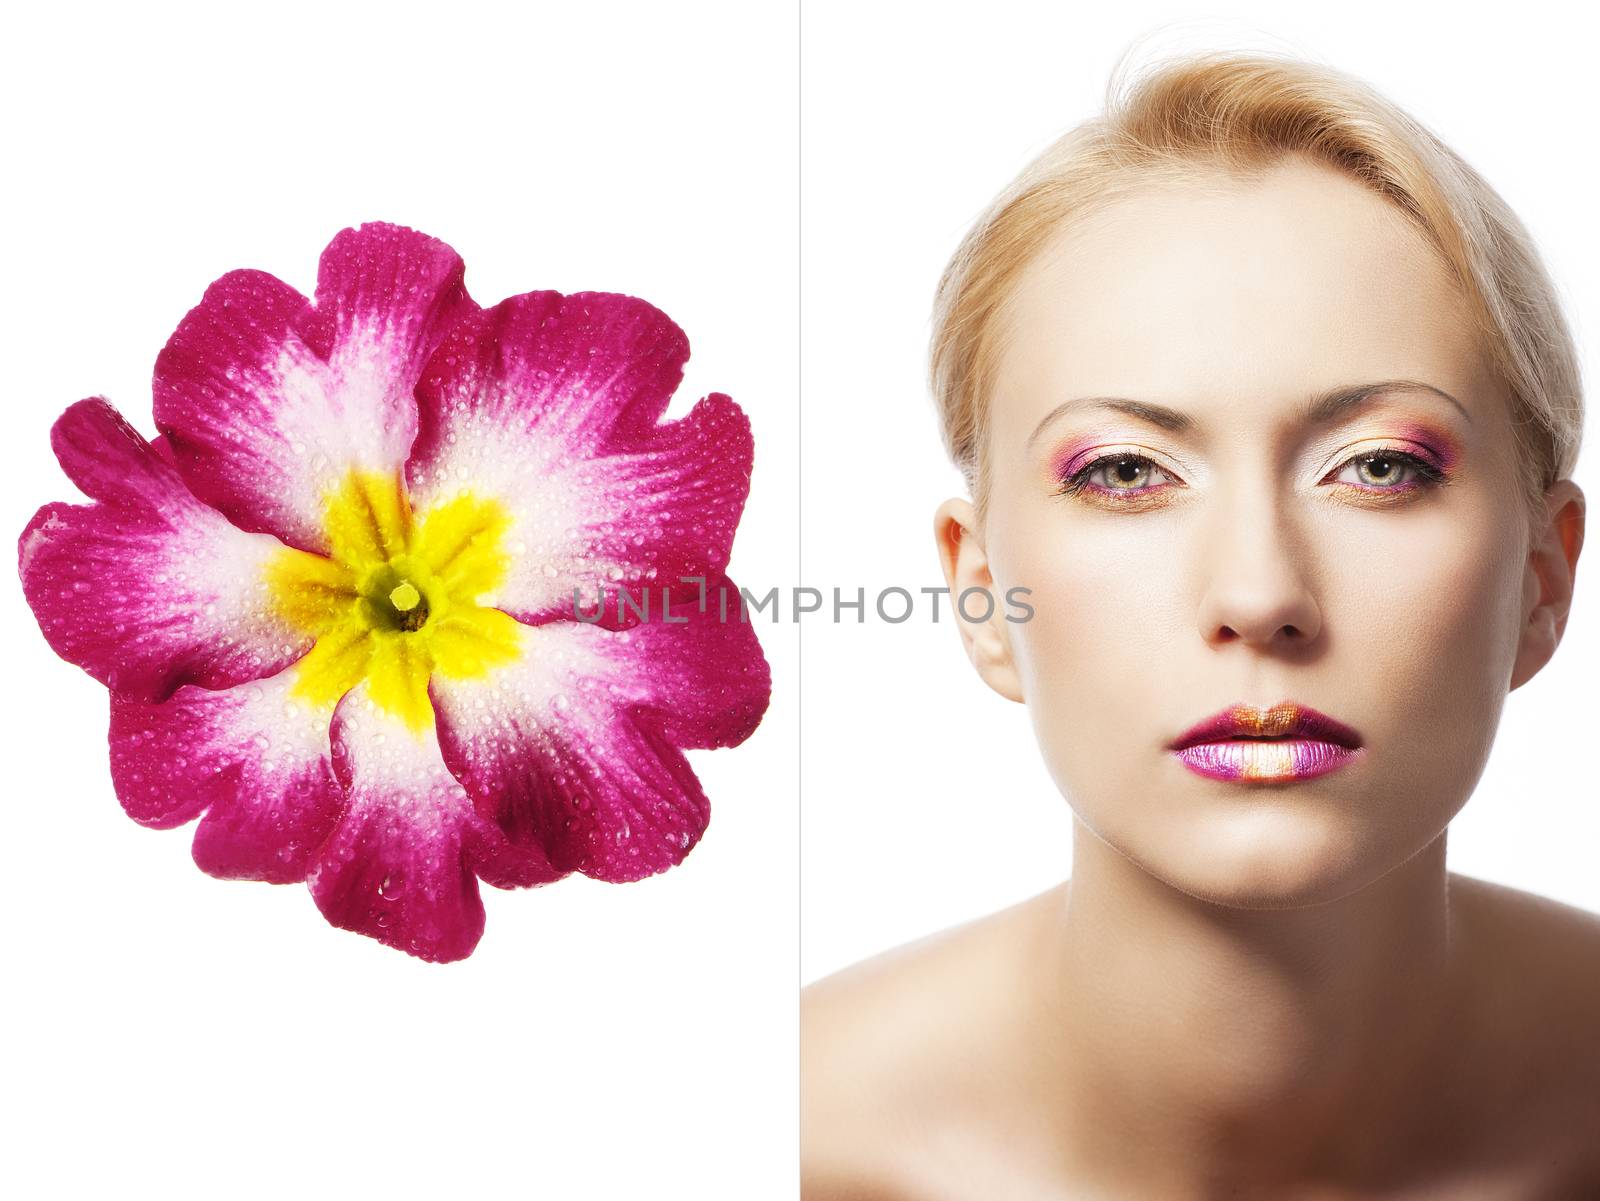 beauty young girl with a floral makeup. She is turned of three quarters and looks in to the lens with attractive expression